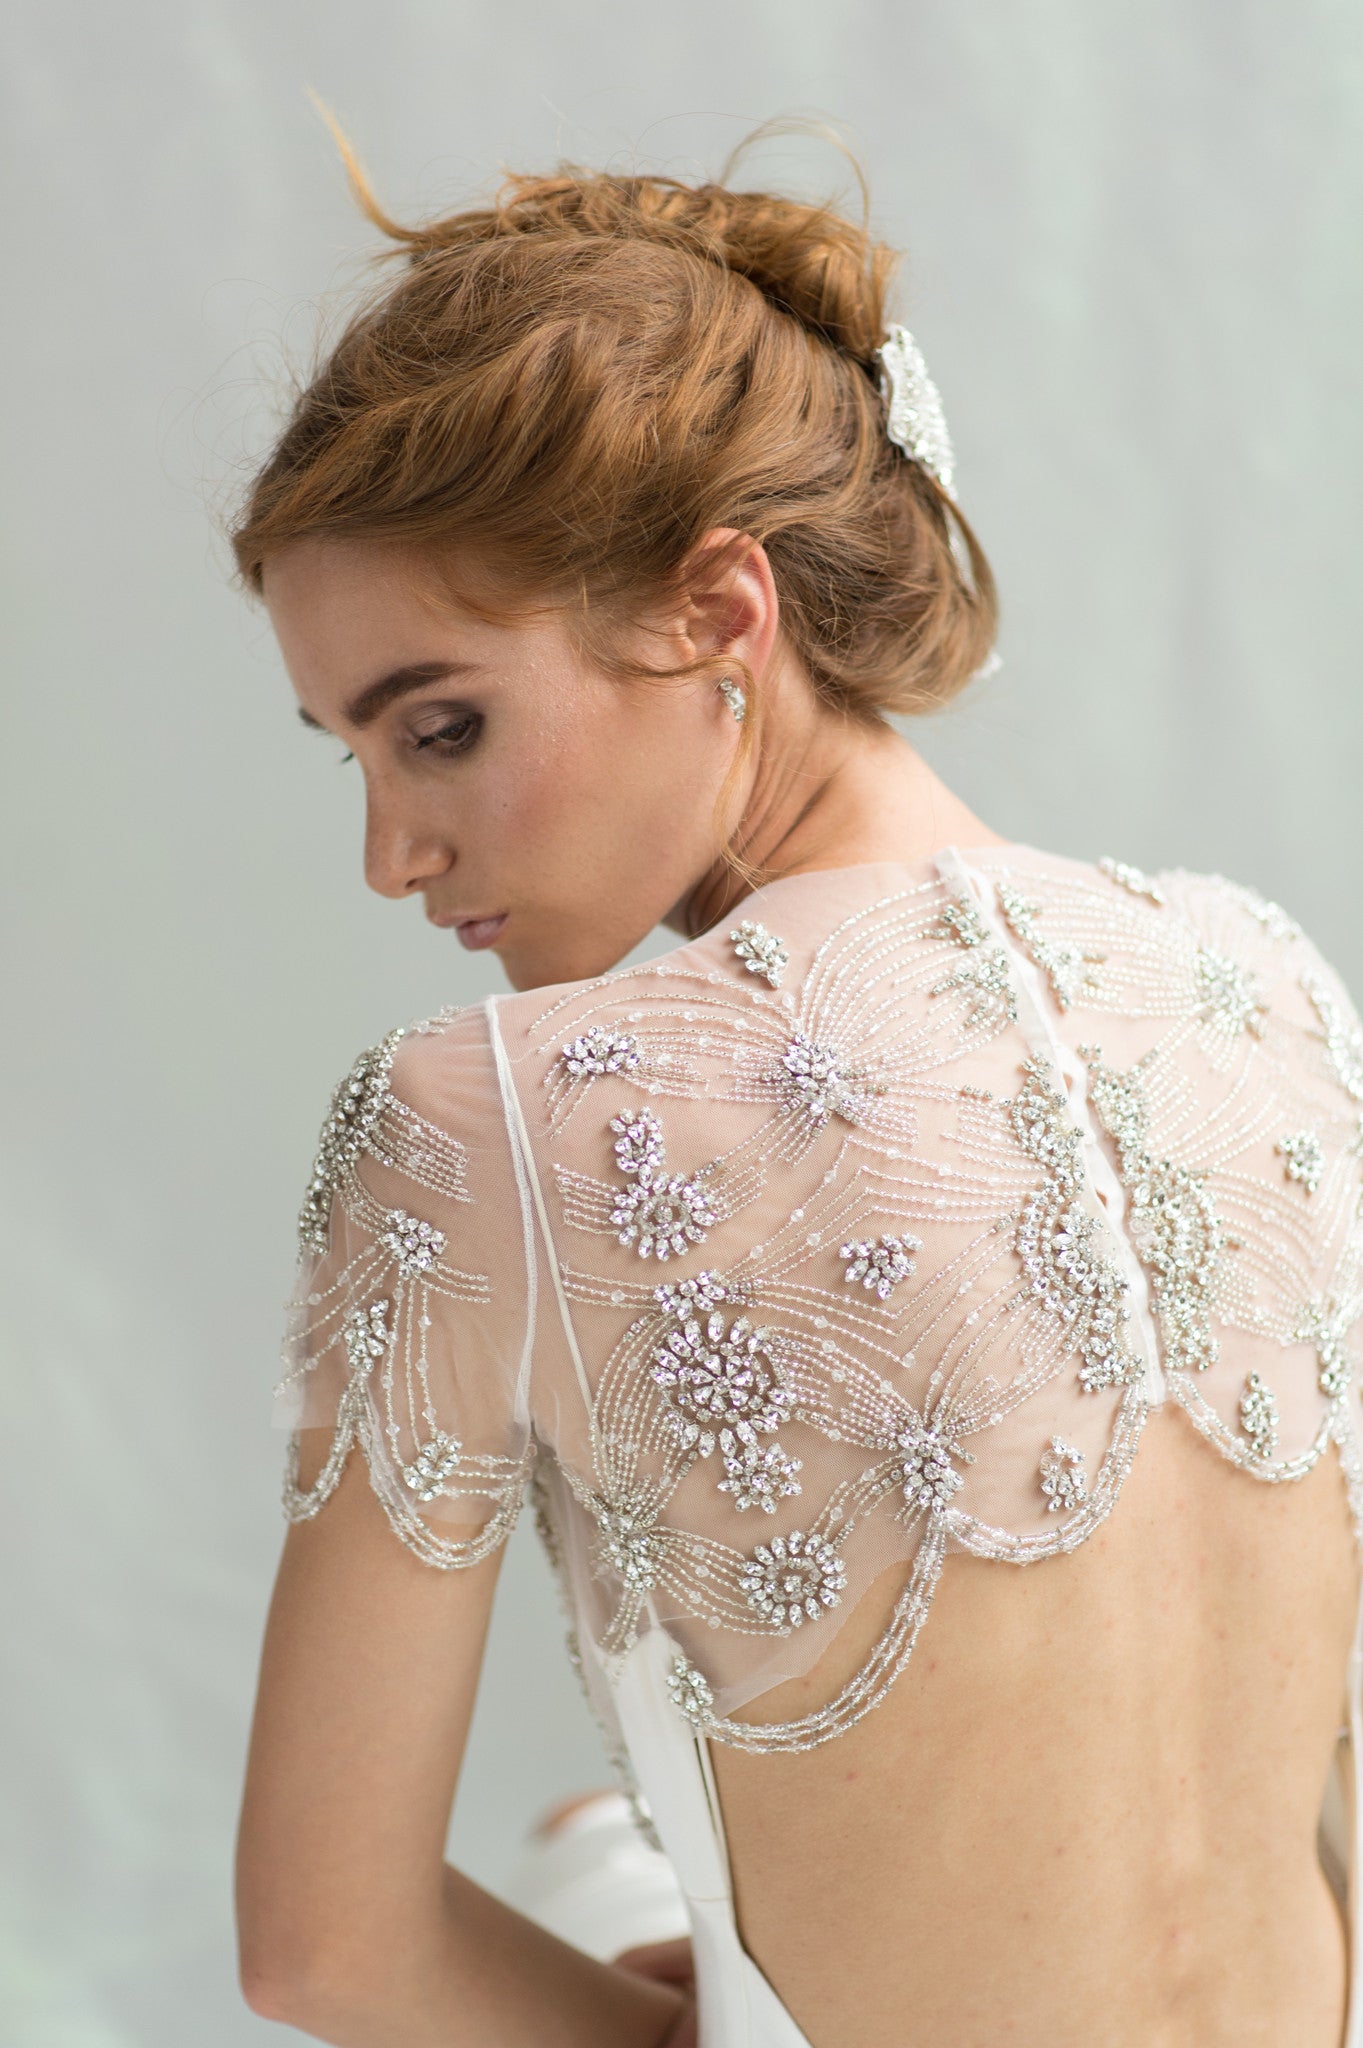 Wedding Dress Topper Beaded Bridal Top Separate Embellished Rhinestone Bolero Art Deco Jacket for Bride Crop Top Short Sleeve Cover Up DAISY by Camilla Christine Bridal Accessories and Wedding Jewelry, Wedding Inspiration Bridal Style